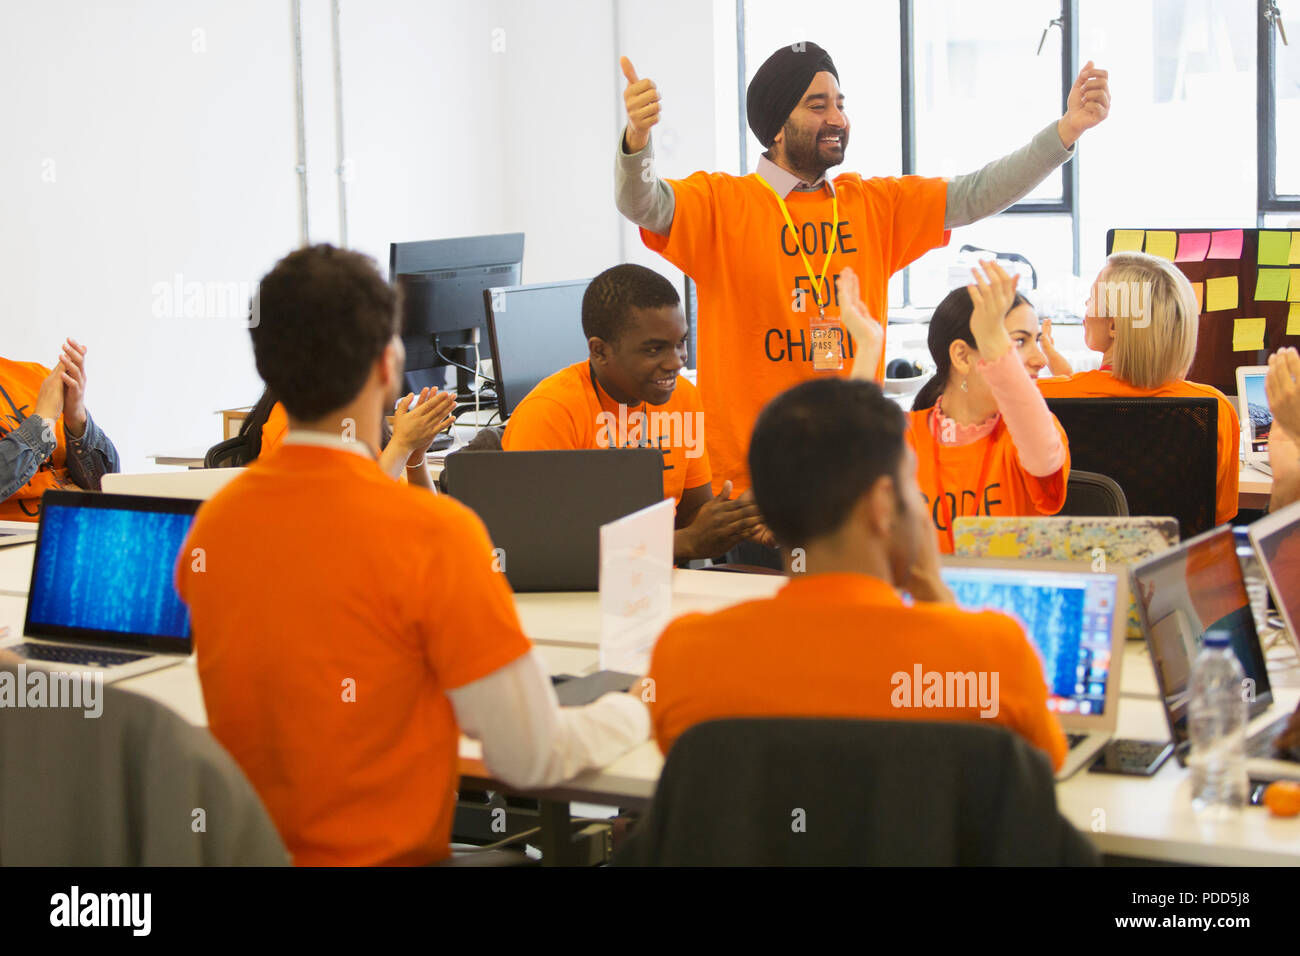 Hackers cheering, coding for charity at hackathon Stock Photo